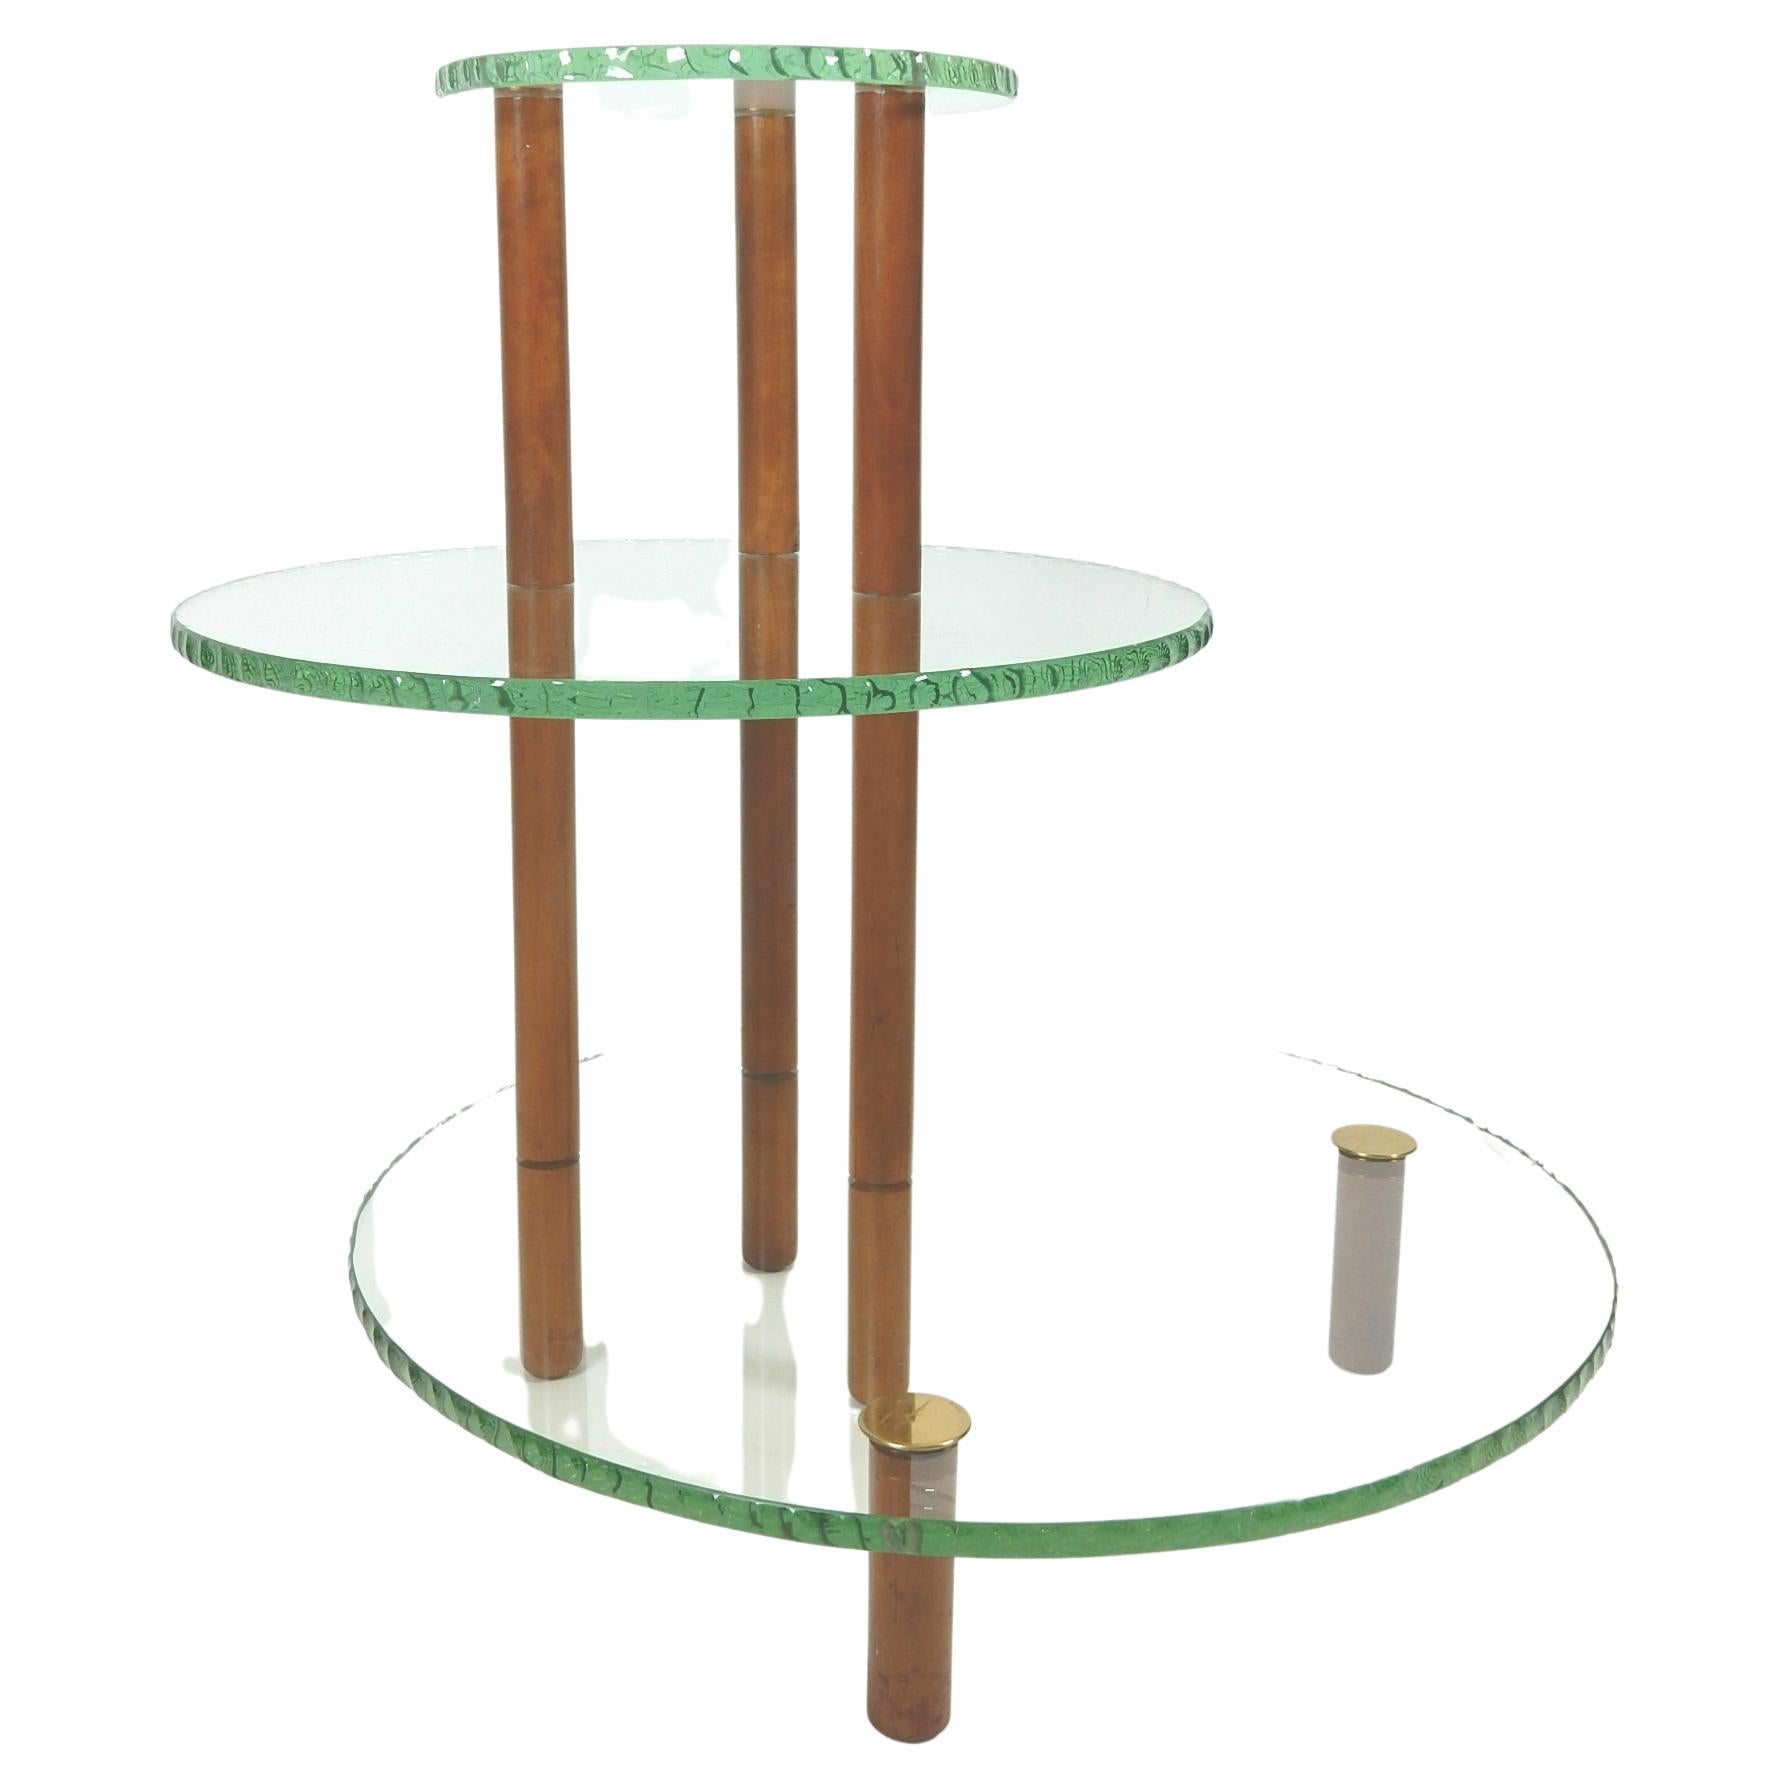 Gorgeous asymmetrical 3-tier etagere' table in the style of Fontana Arte', circa 1960s.
Chiseled green edge glass shelfs. 
Walnut dowels support legs topped with polished brass finials.
Would make a perfect dry bar or curio display.
Bottom glass